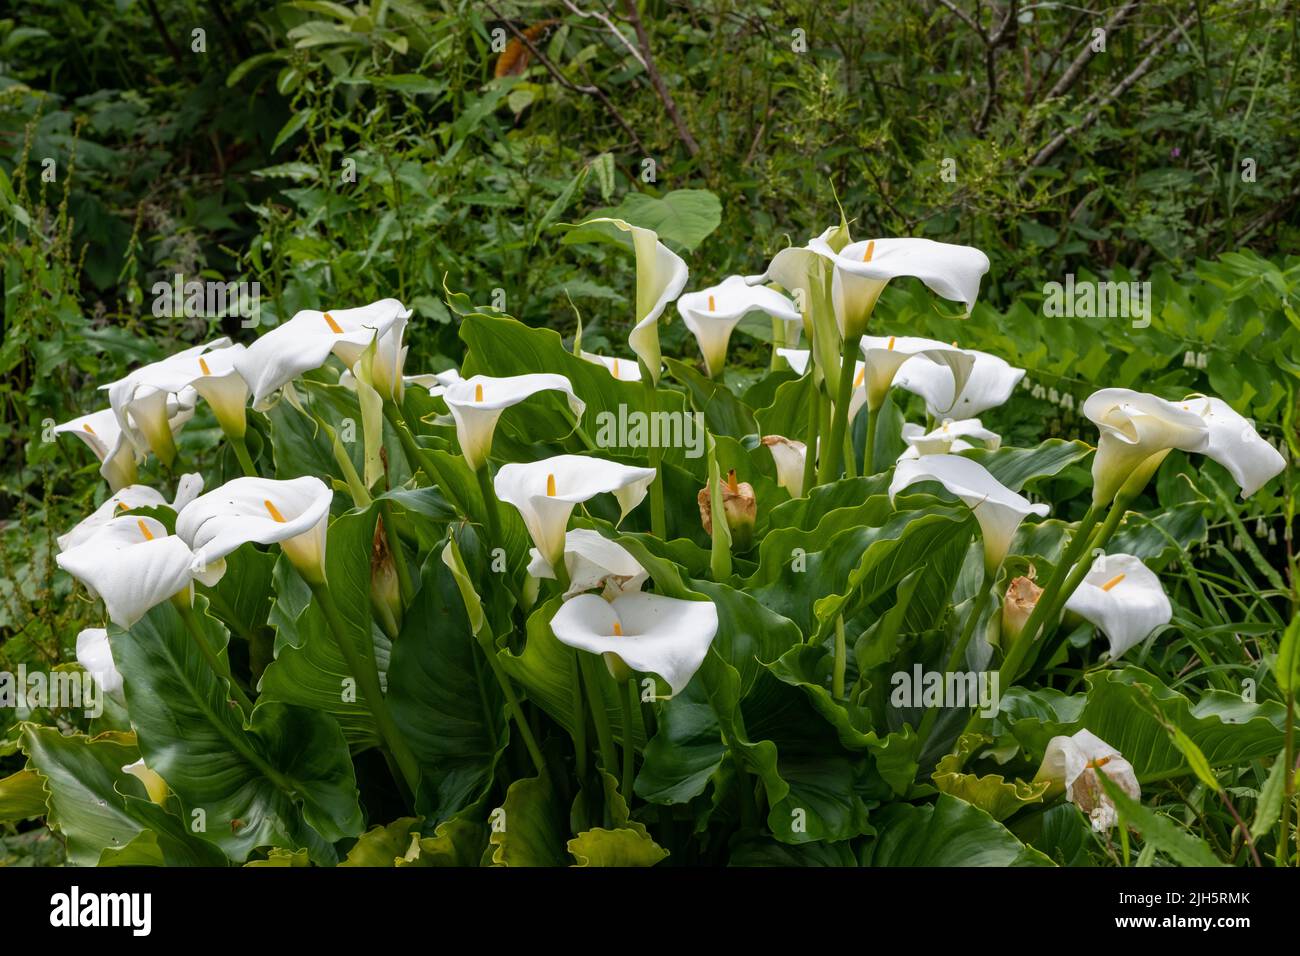 Close up of calla lily (zantedeschia aethiopica) flowers in bloom Stock Photo